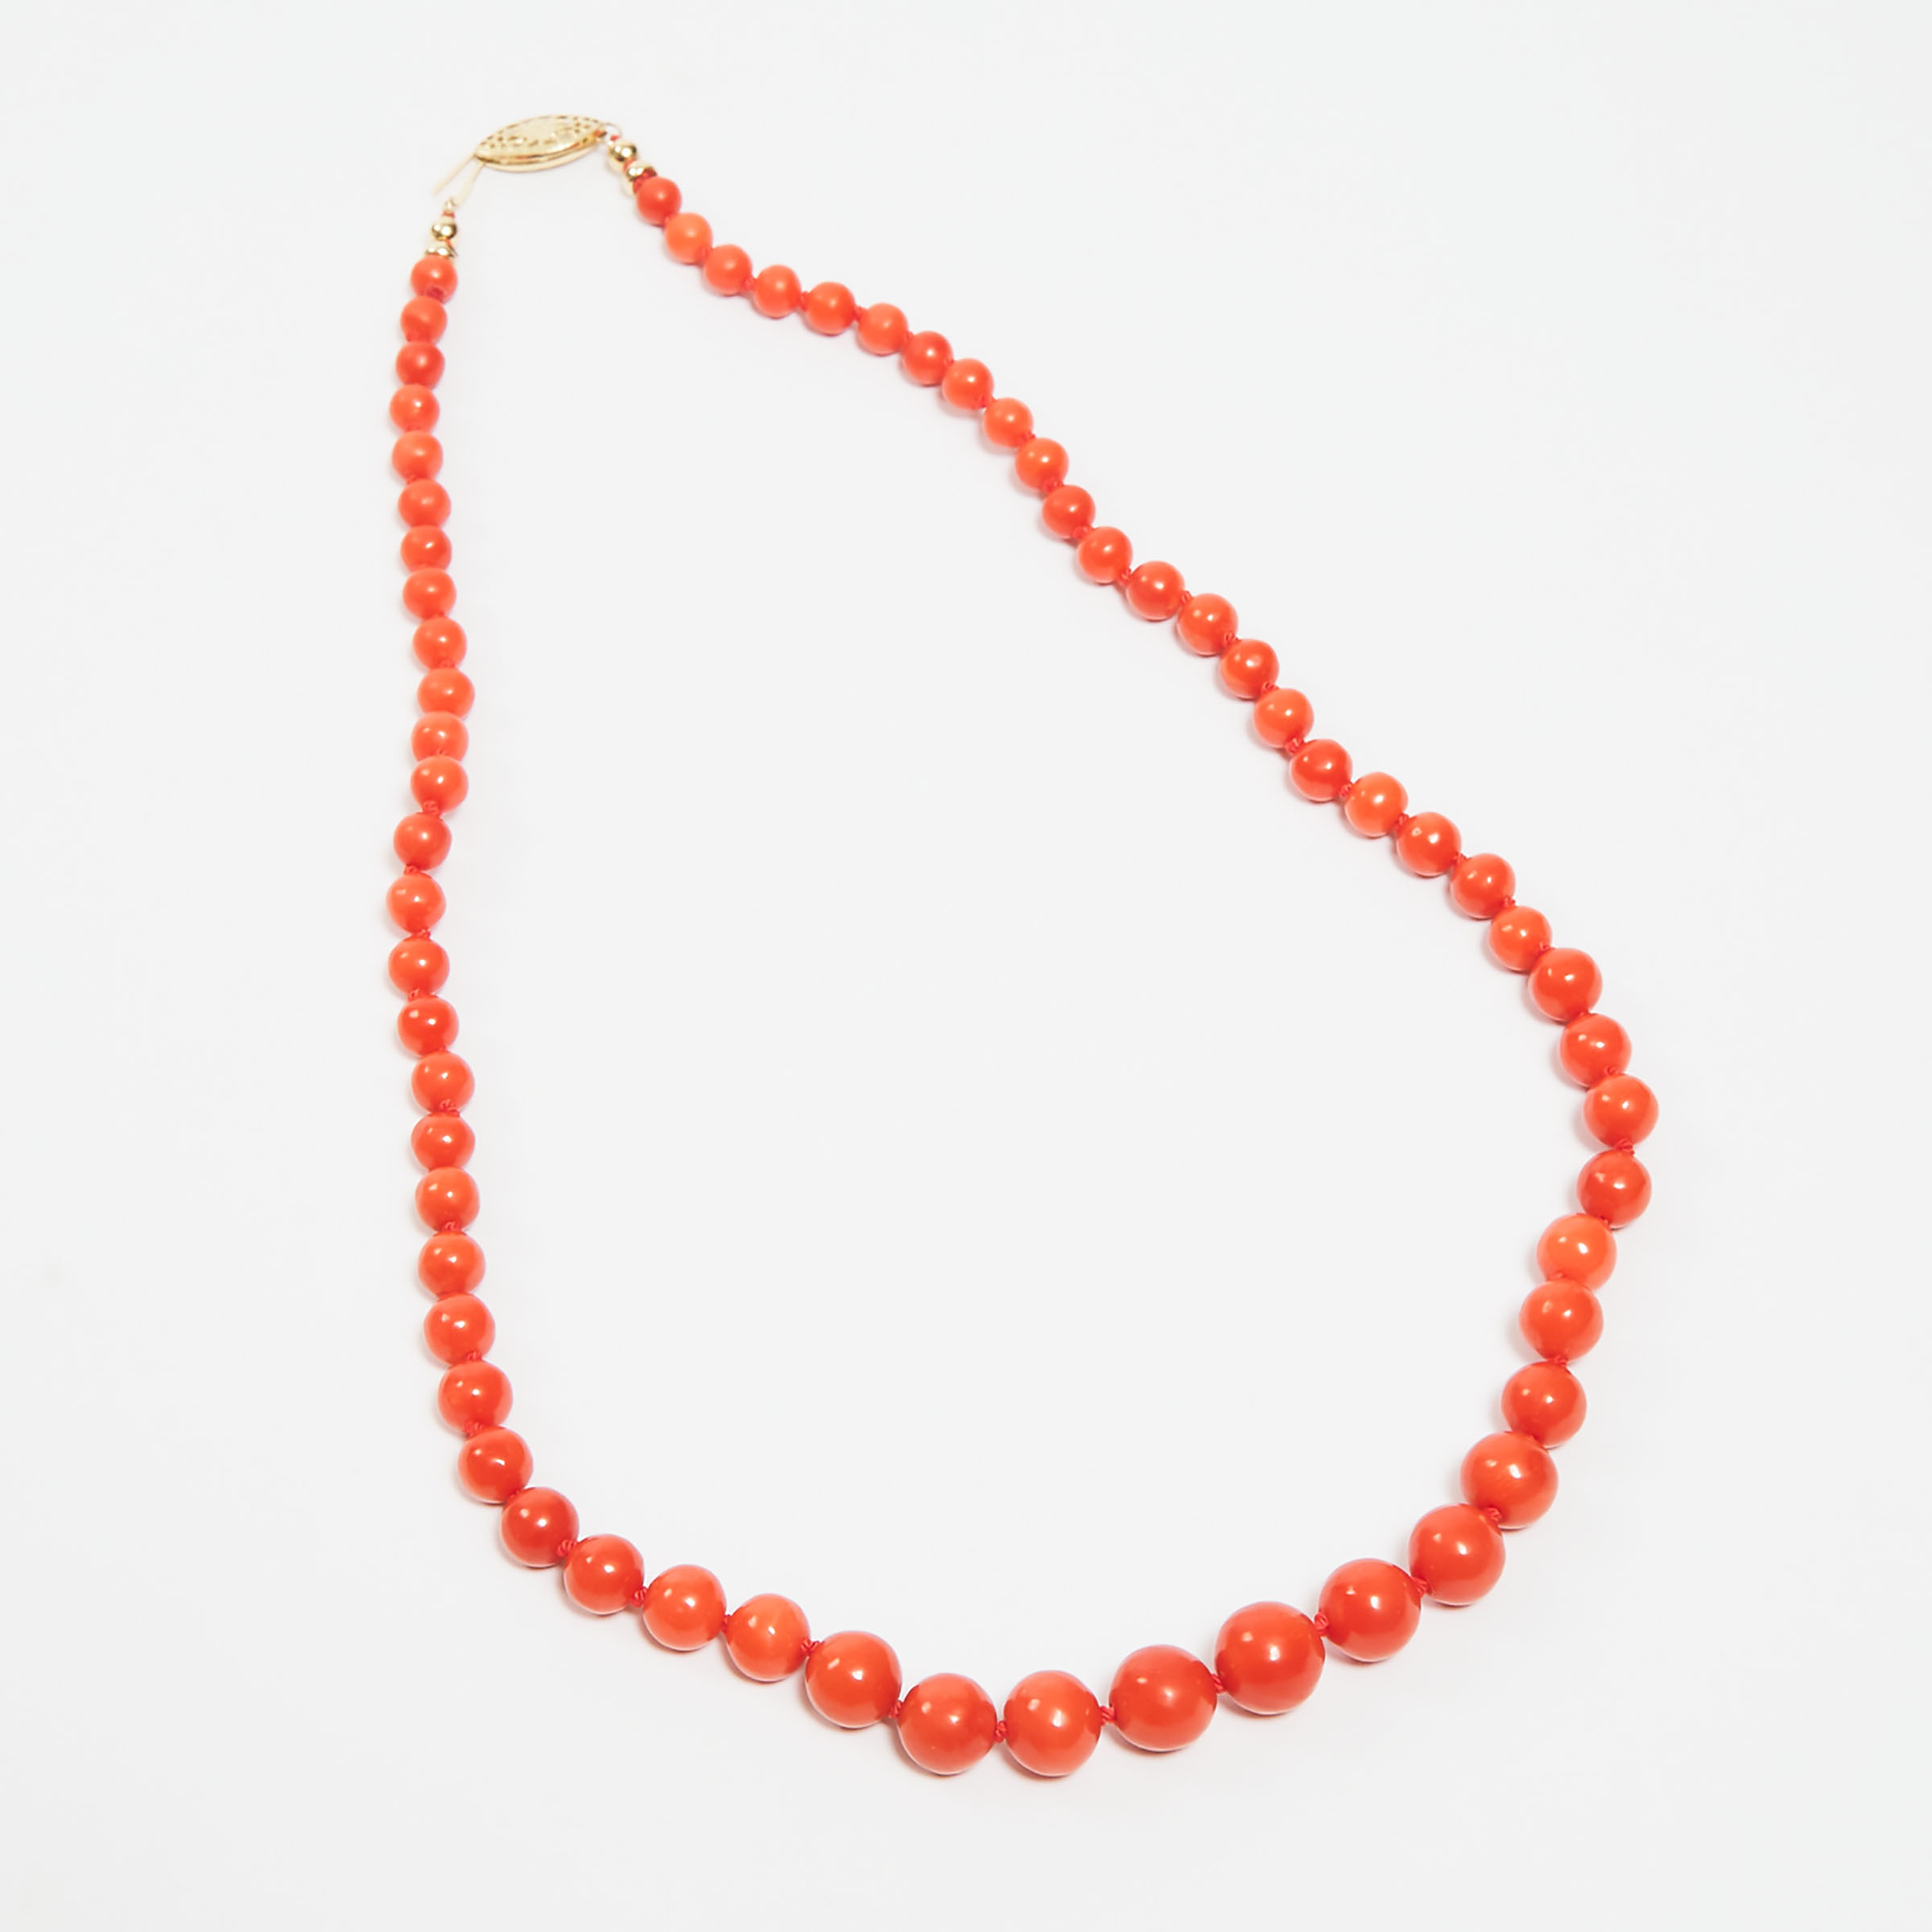 A Coral Beaded Necklace